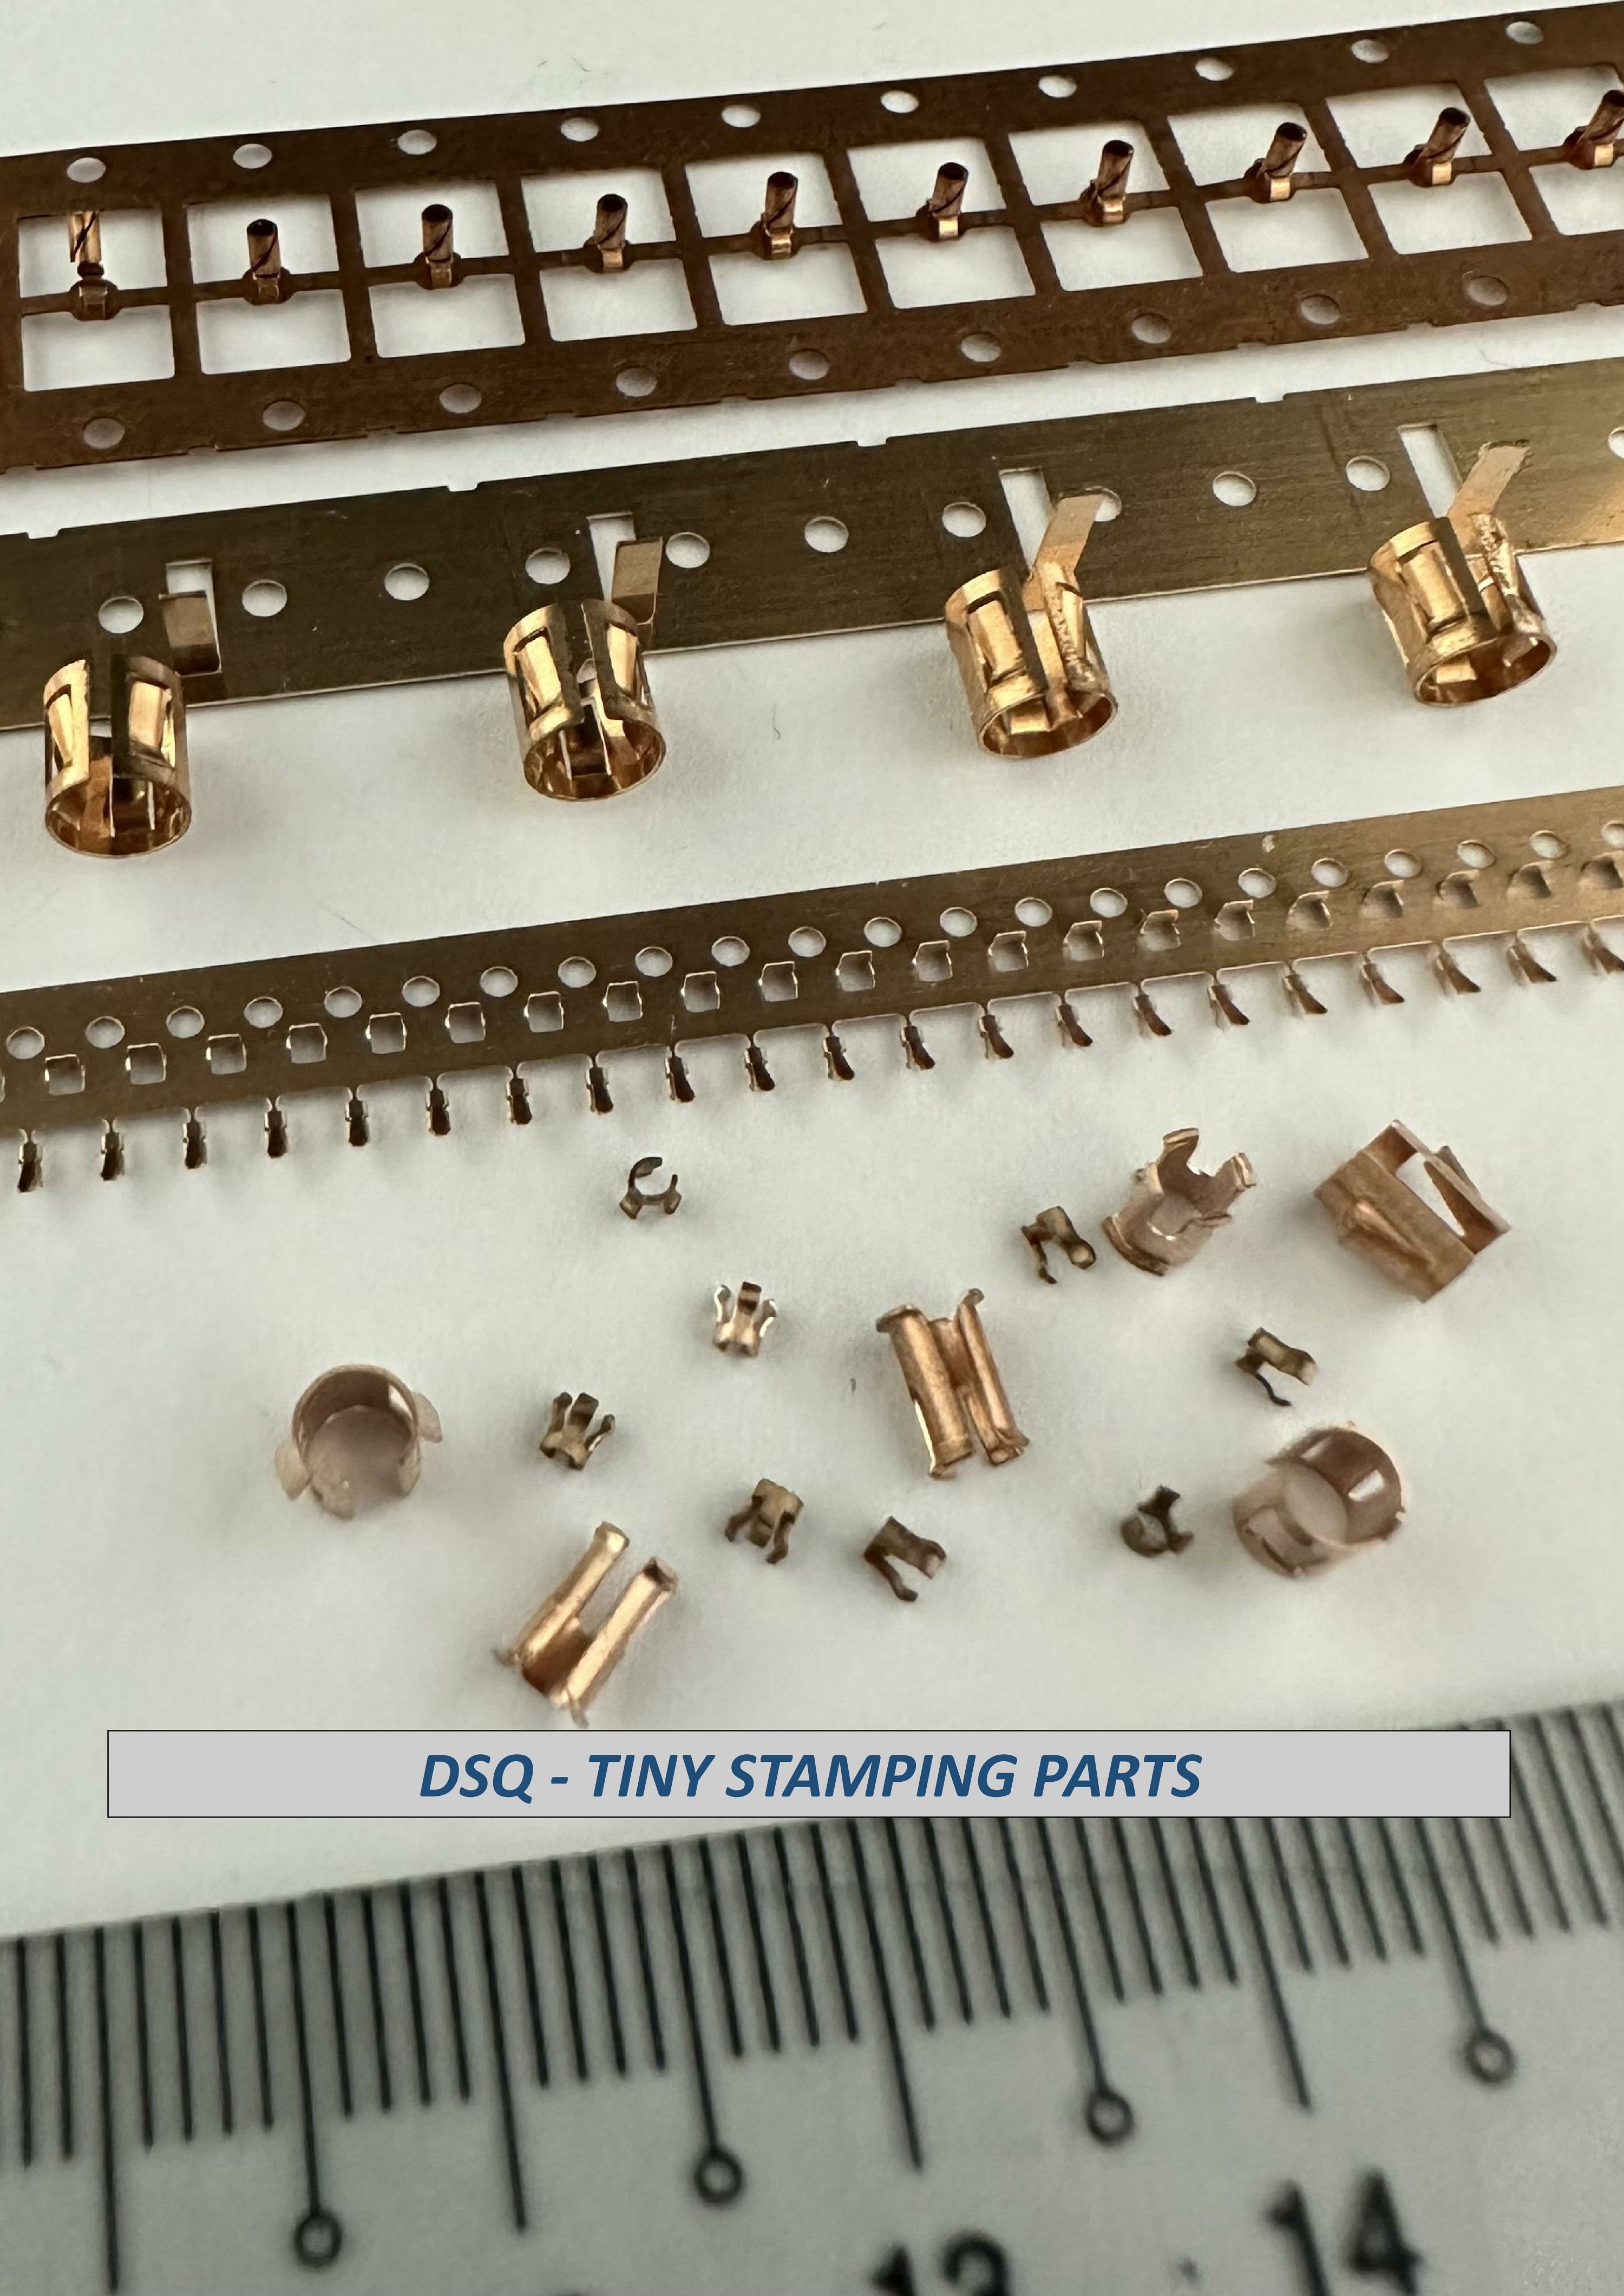 DSQ provides Tiny Stamping Parts to customers within various industries